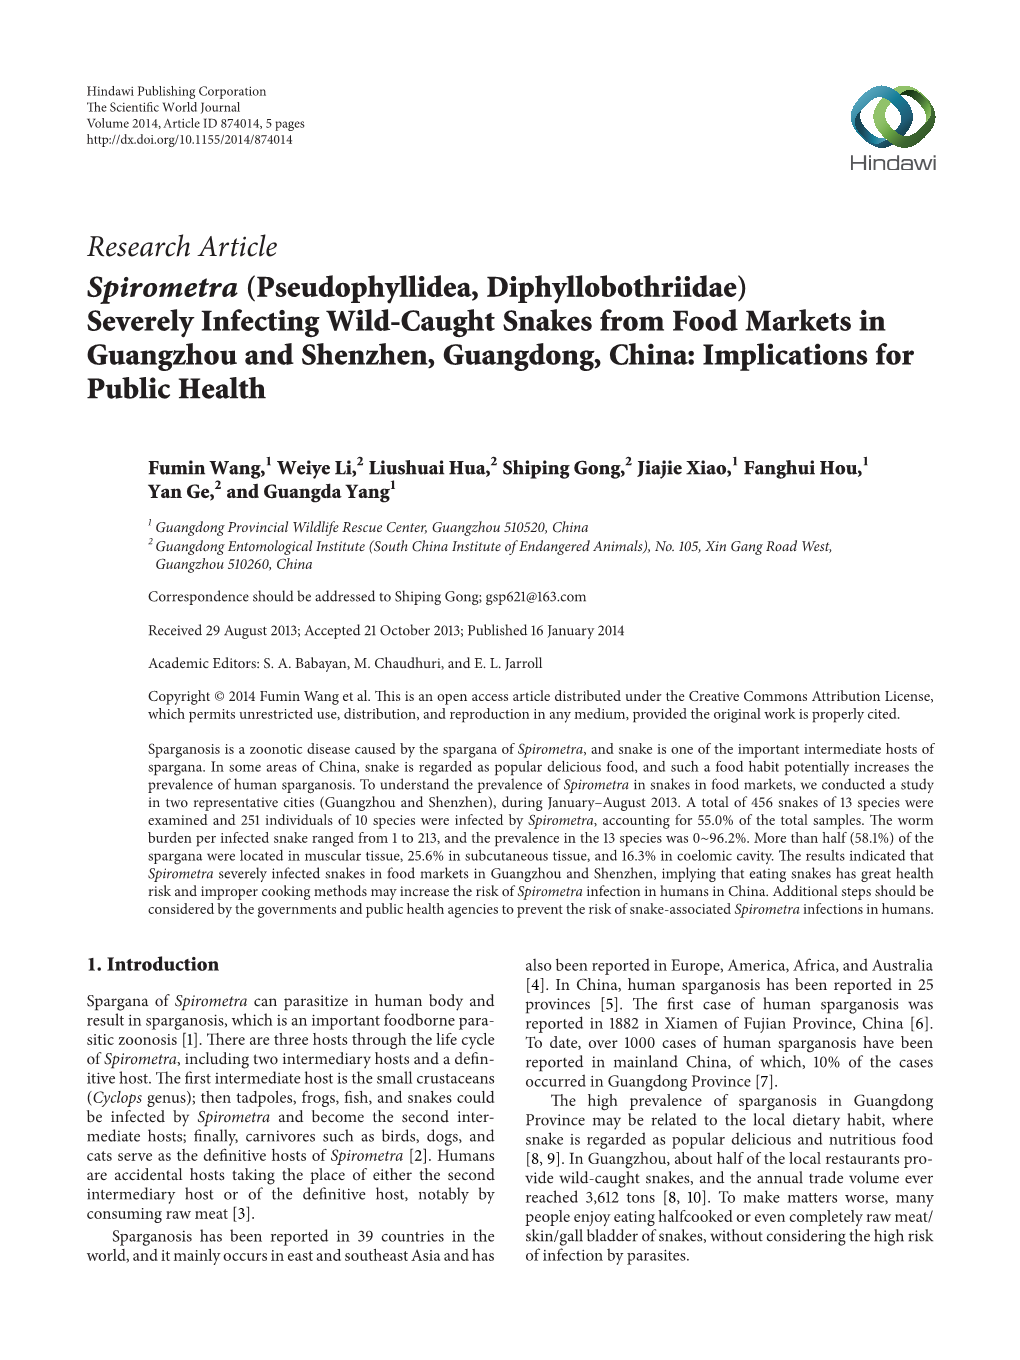 Spirometra (Pseudophyllidea, Diphyllobothriidae) Severely Infecting Wild-Caught Snakes from Food Markets in Guangzhou and Shenzhen, Guangdong, China: Implications for Public Health